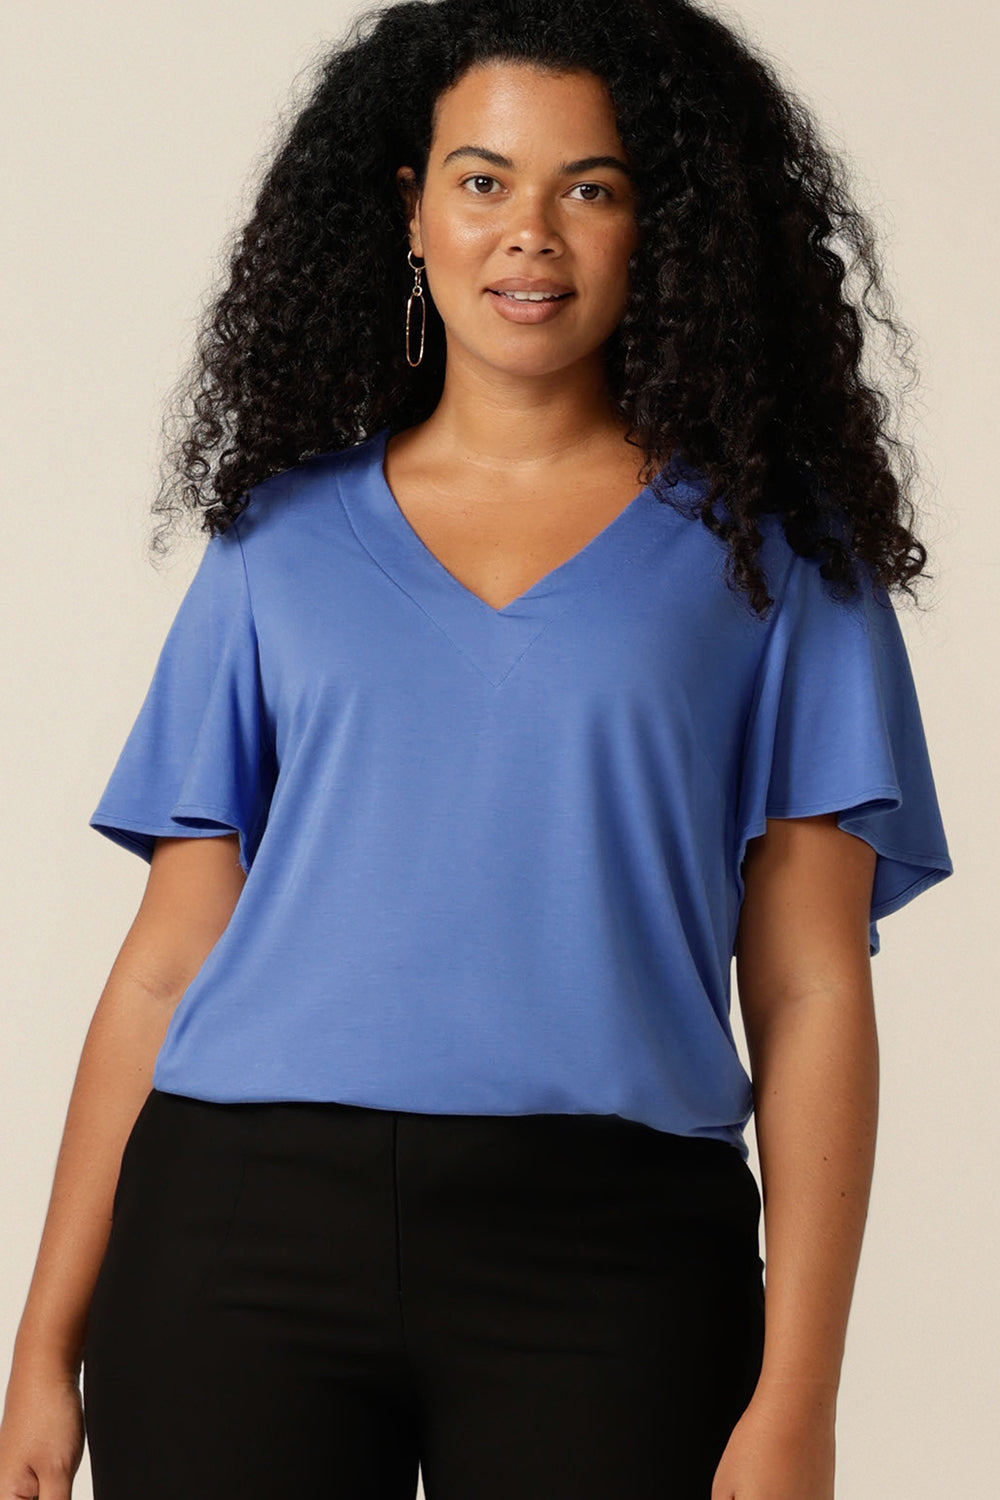 A size 12 curvy woman wears a blue bamboo jersey top with a V-neck and short flutter sleeves. It is a lightweight and breathable top thanks to its natural and sustainable bamboo fibres, and being made in Australia, it is part of L&Fs move towards greater sustainability and eco-conscious fashion.